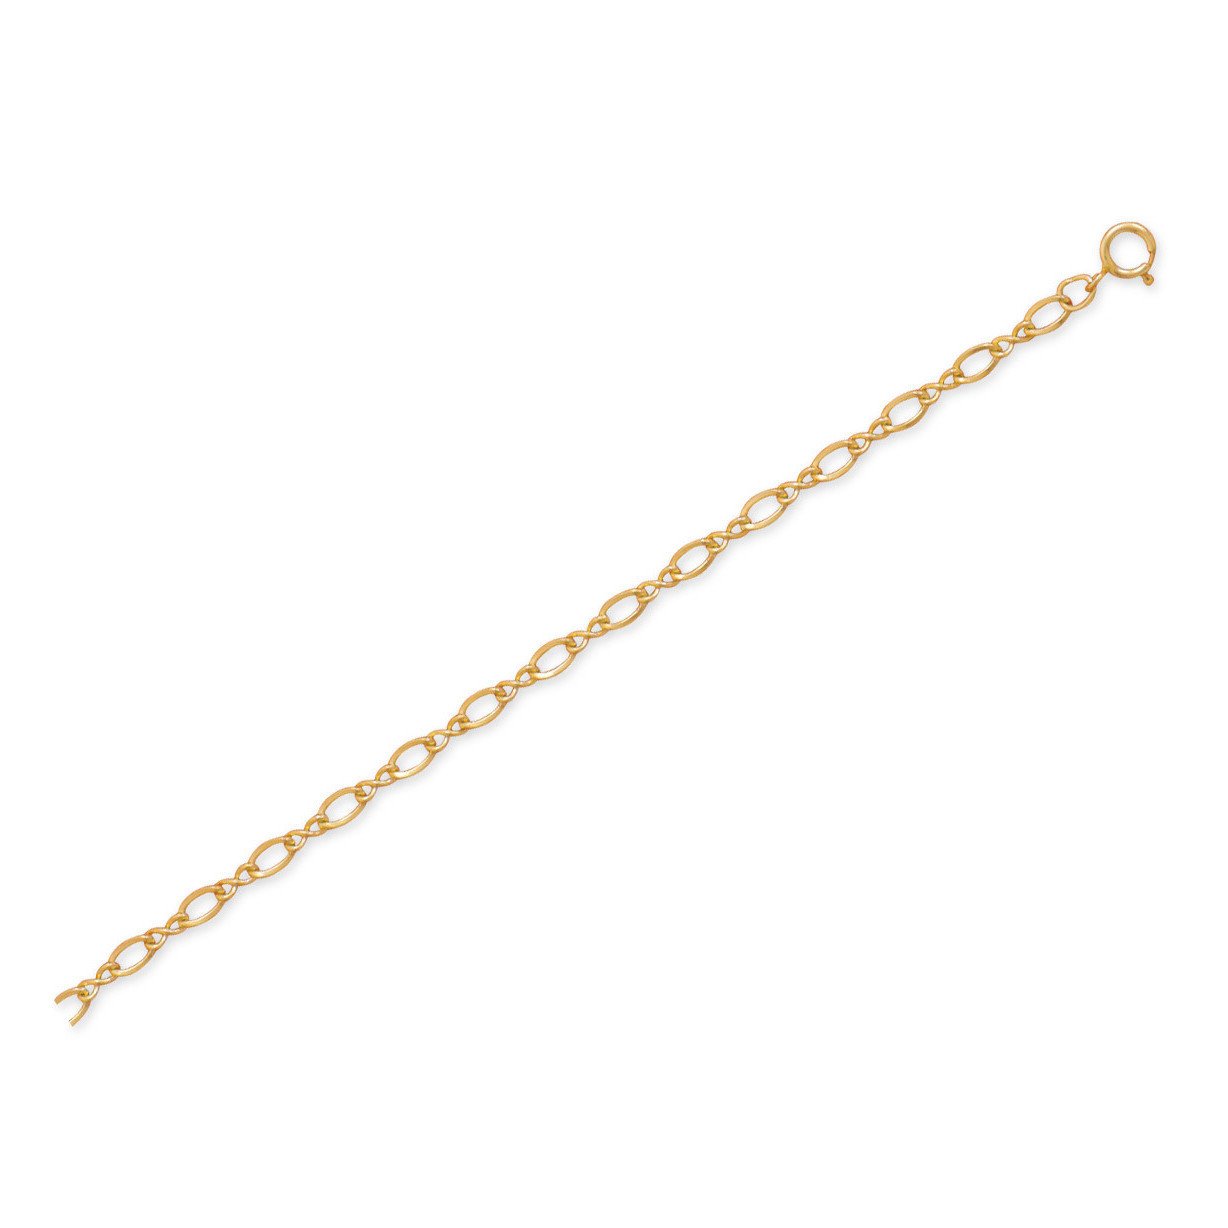 9"+1" 14/20 Gold Filled Figure 8 Chain Anklet - Joyeria Lady